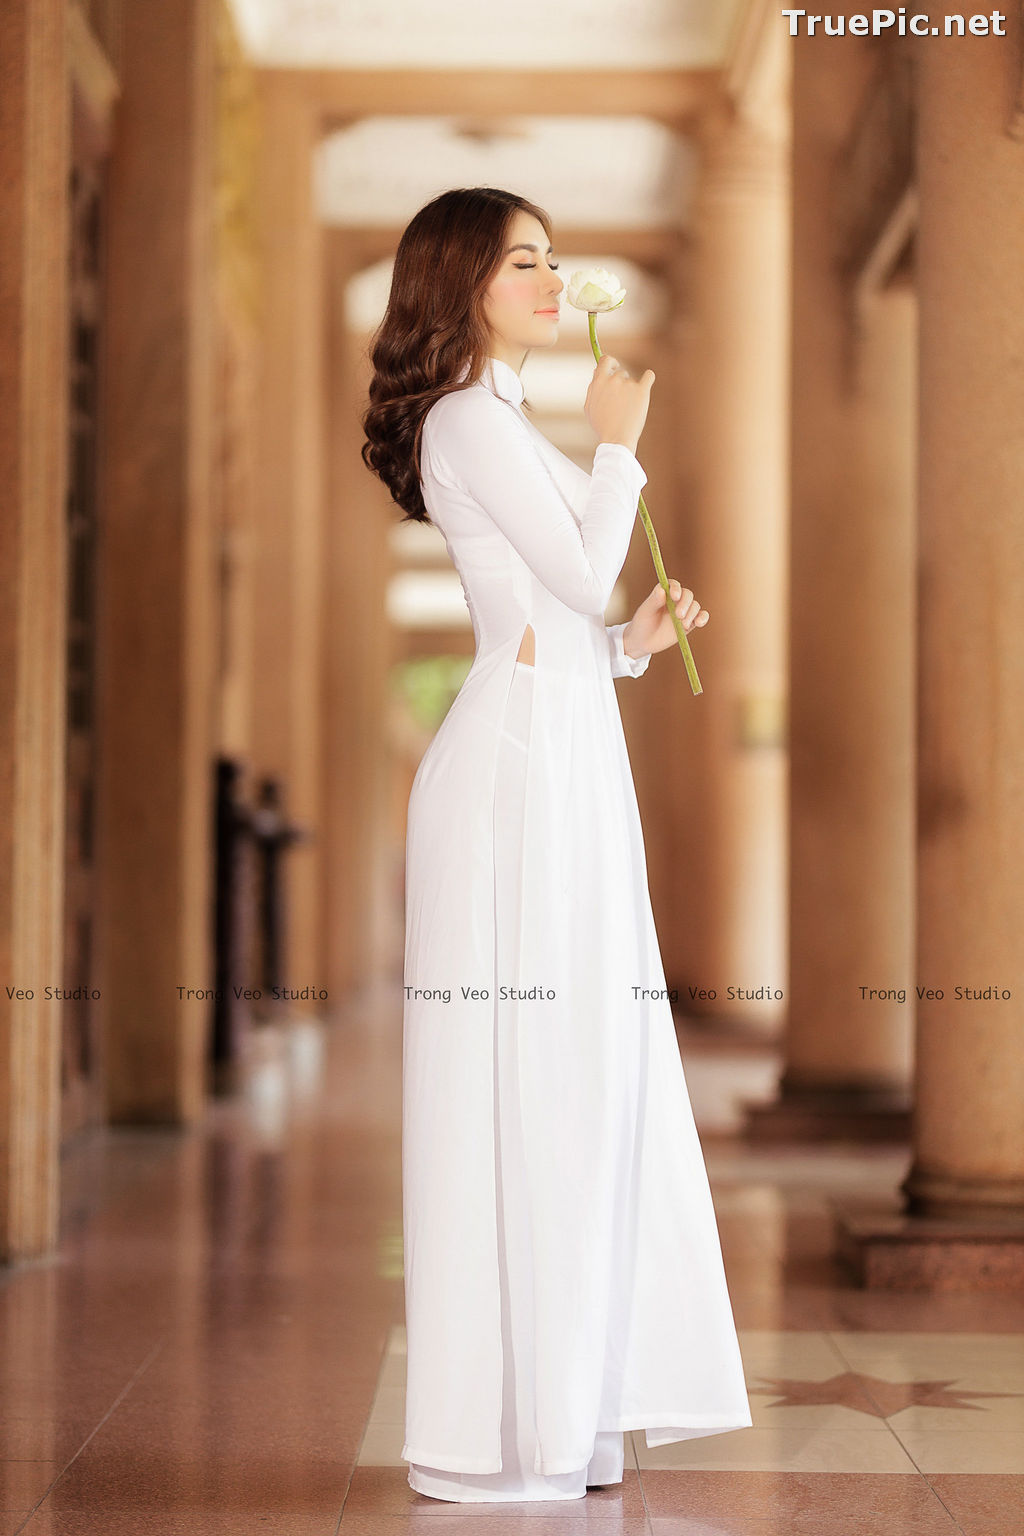 Image The Beauty of Vietnamese Girls with Traditional Dress (Ao Dai) #3 - TruePic.net - Picture-50